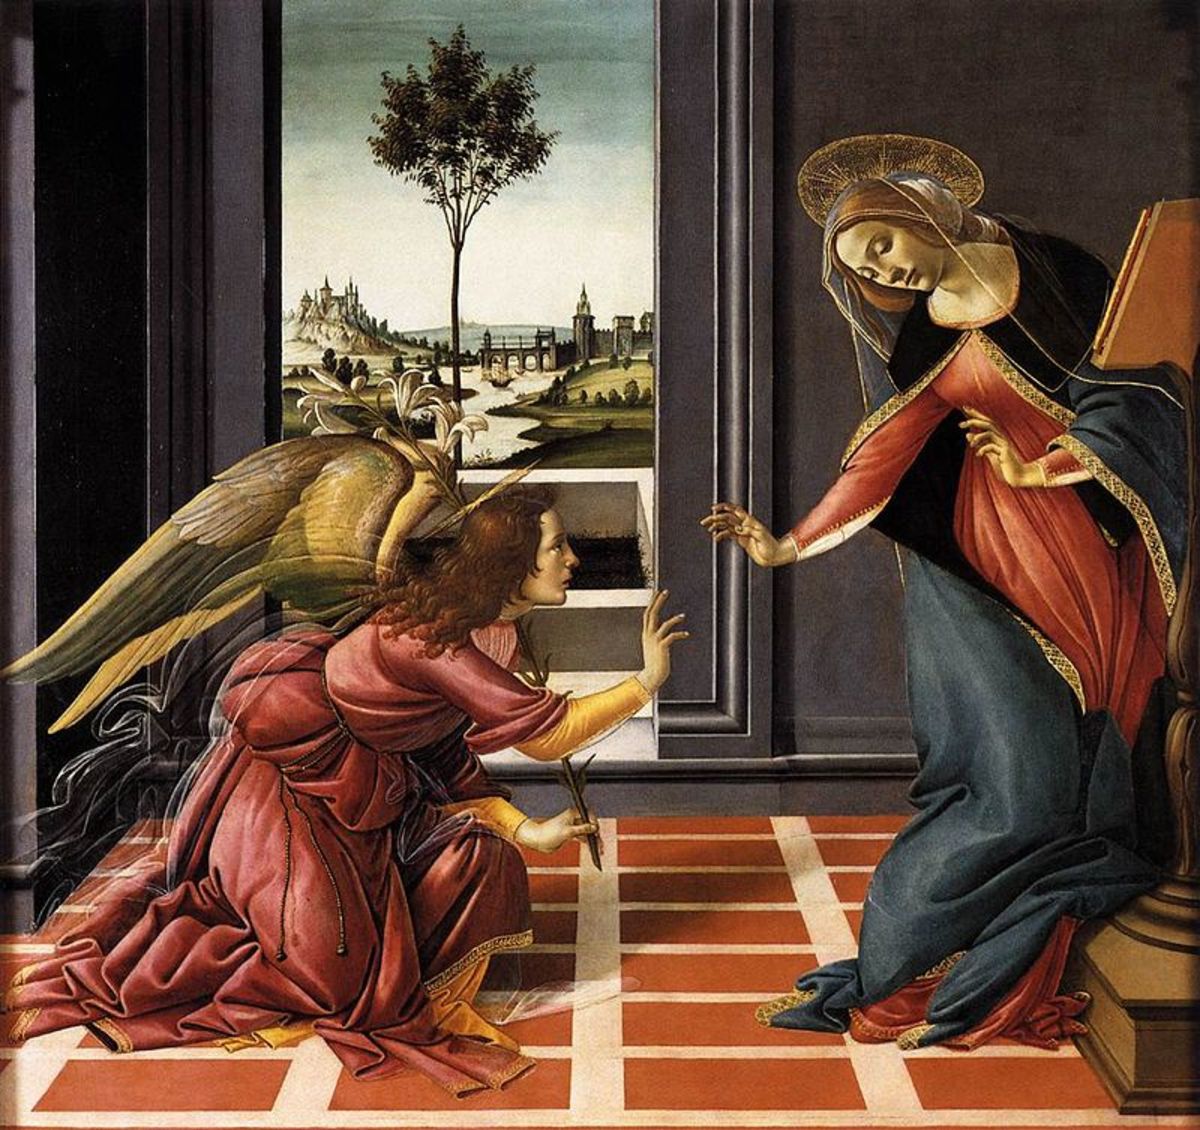 Analysis on : Annunciation by Sandro Botticelli